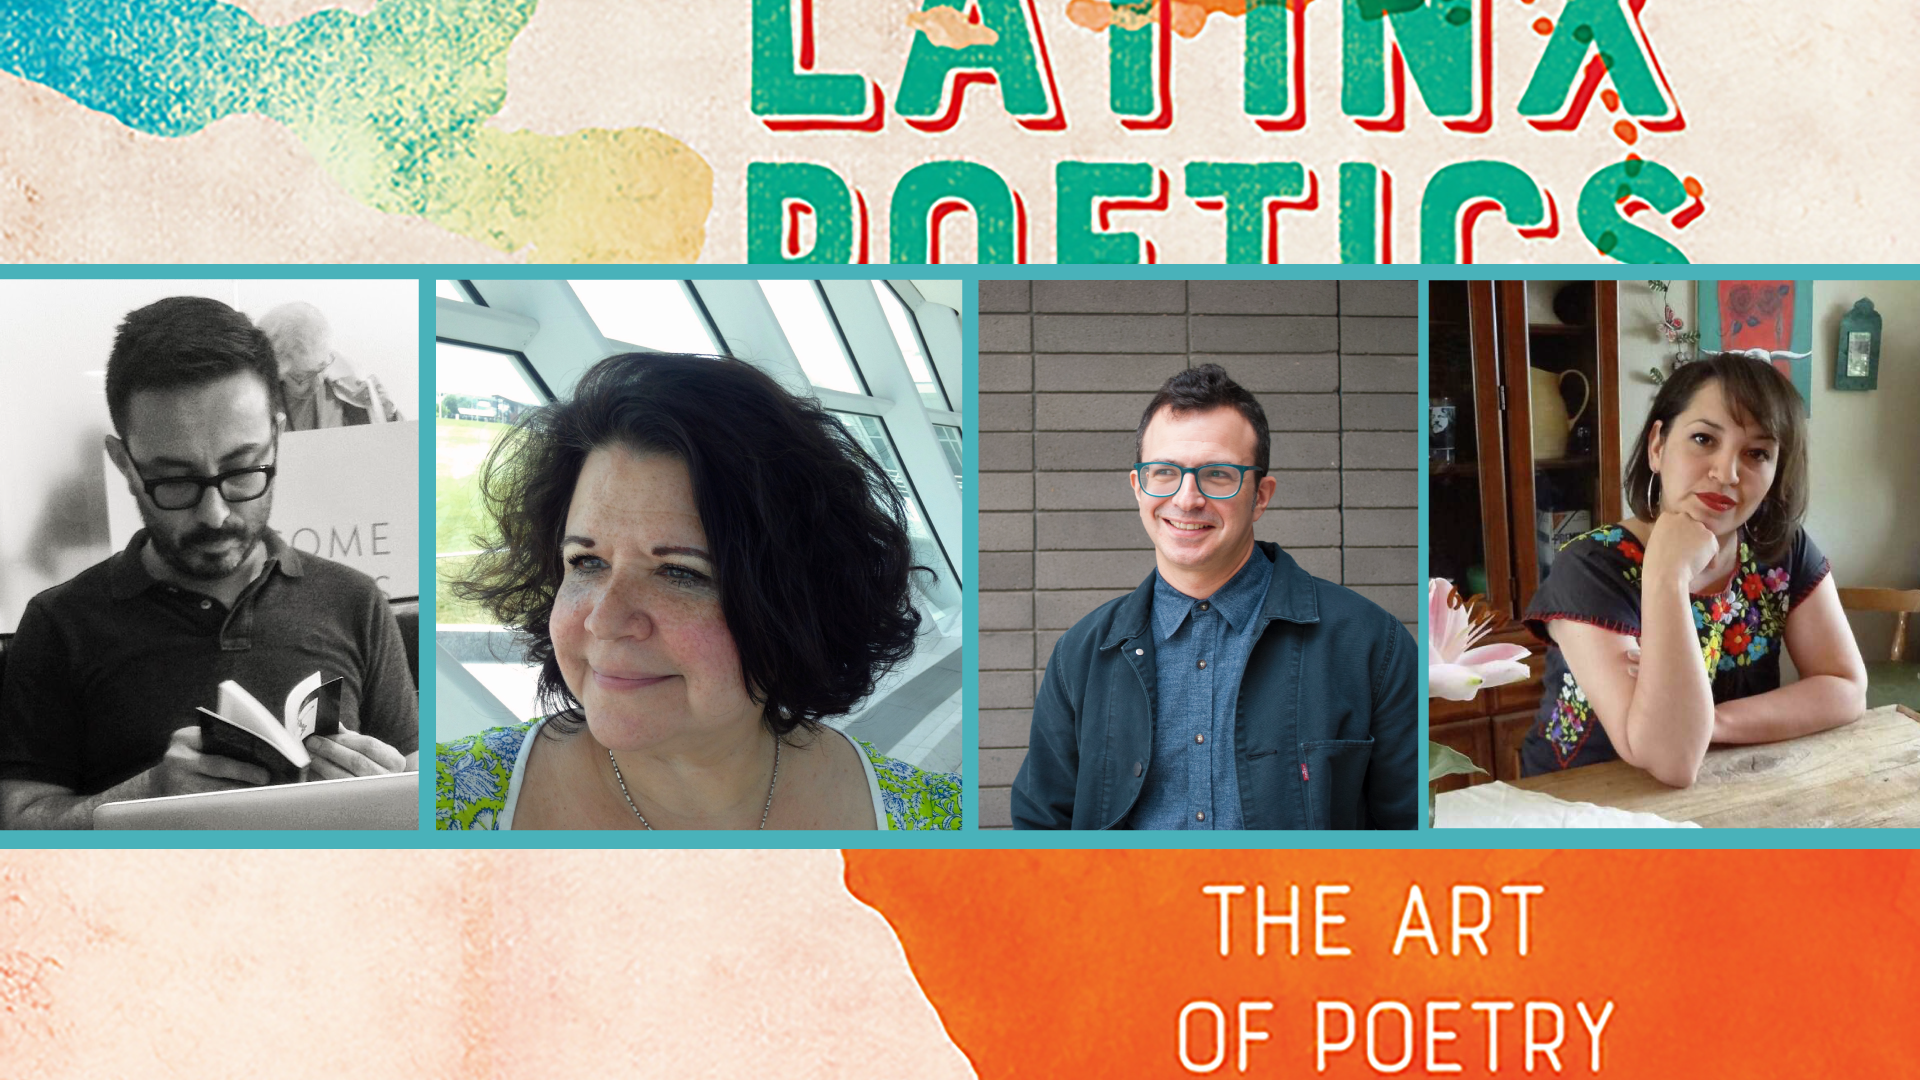 Promotional image, background is a close-up of the cover of Latinx Poetics, in the center is the four author photos in a row as listed in the description